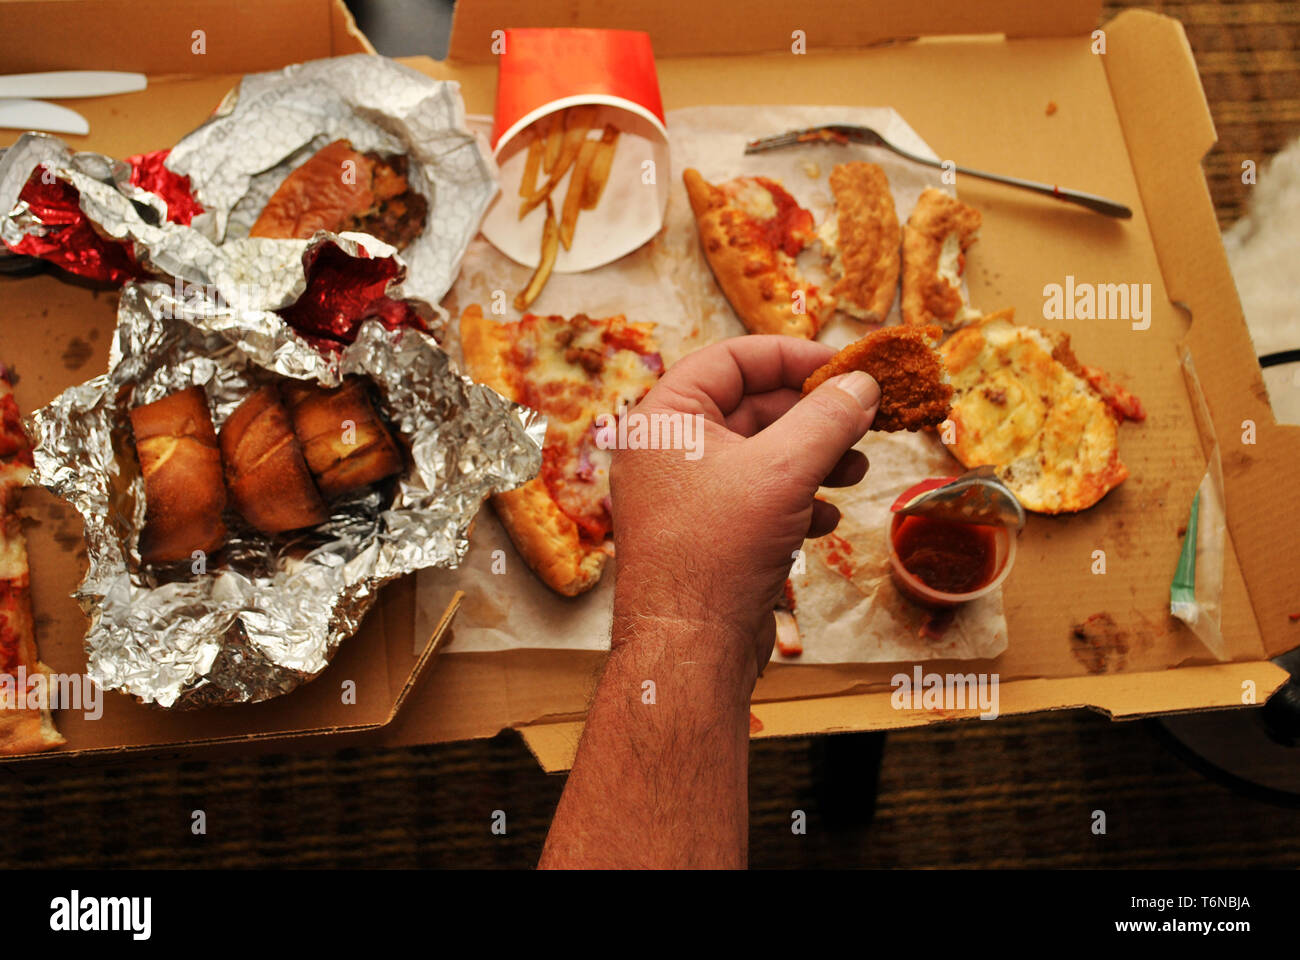 Eating Takeout Junk Food Stock Photo